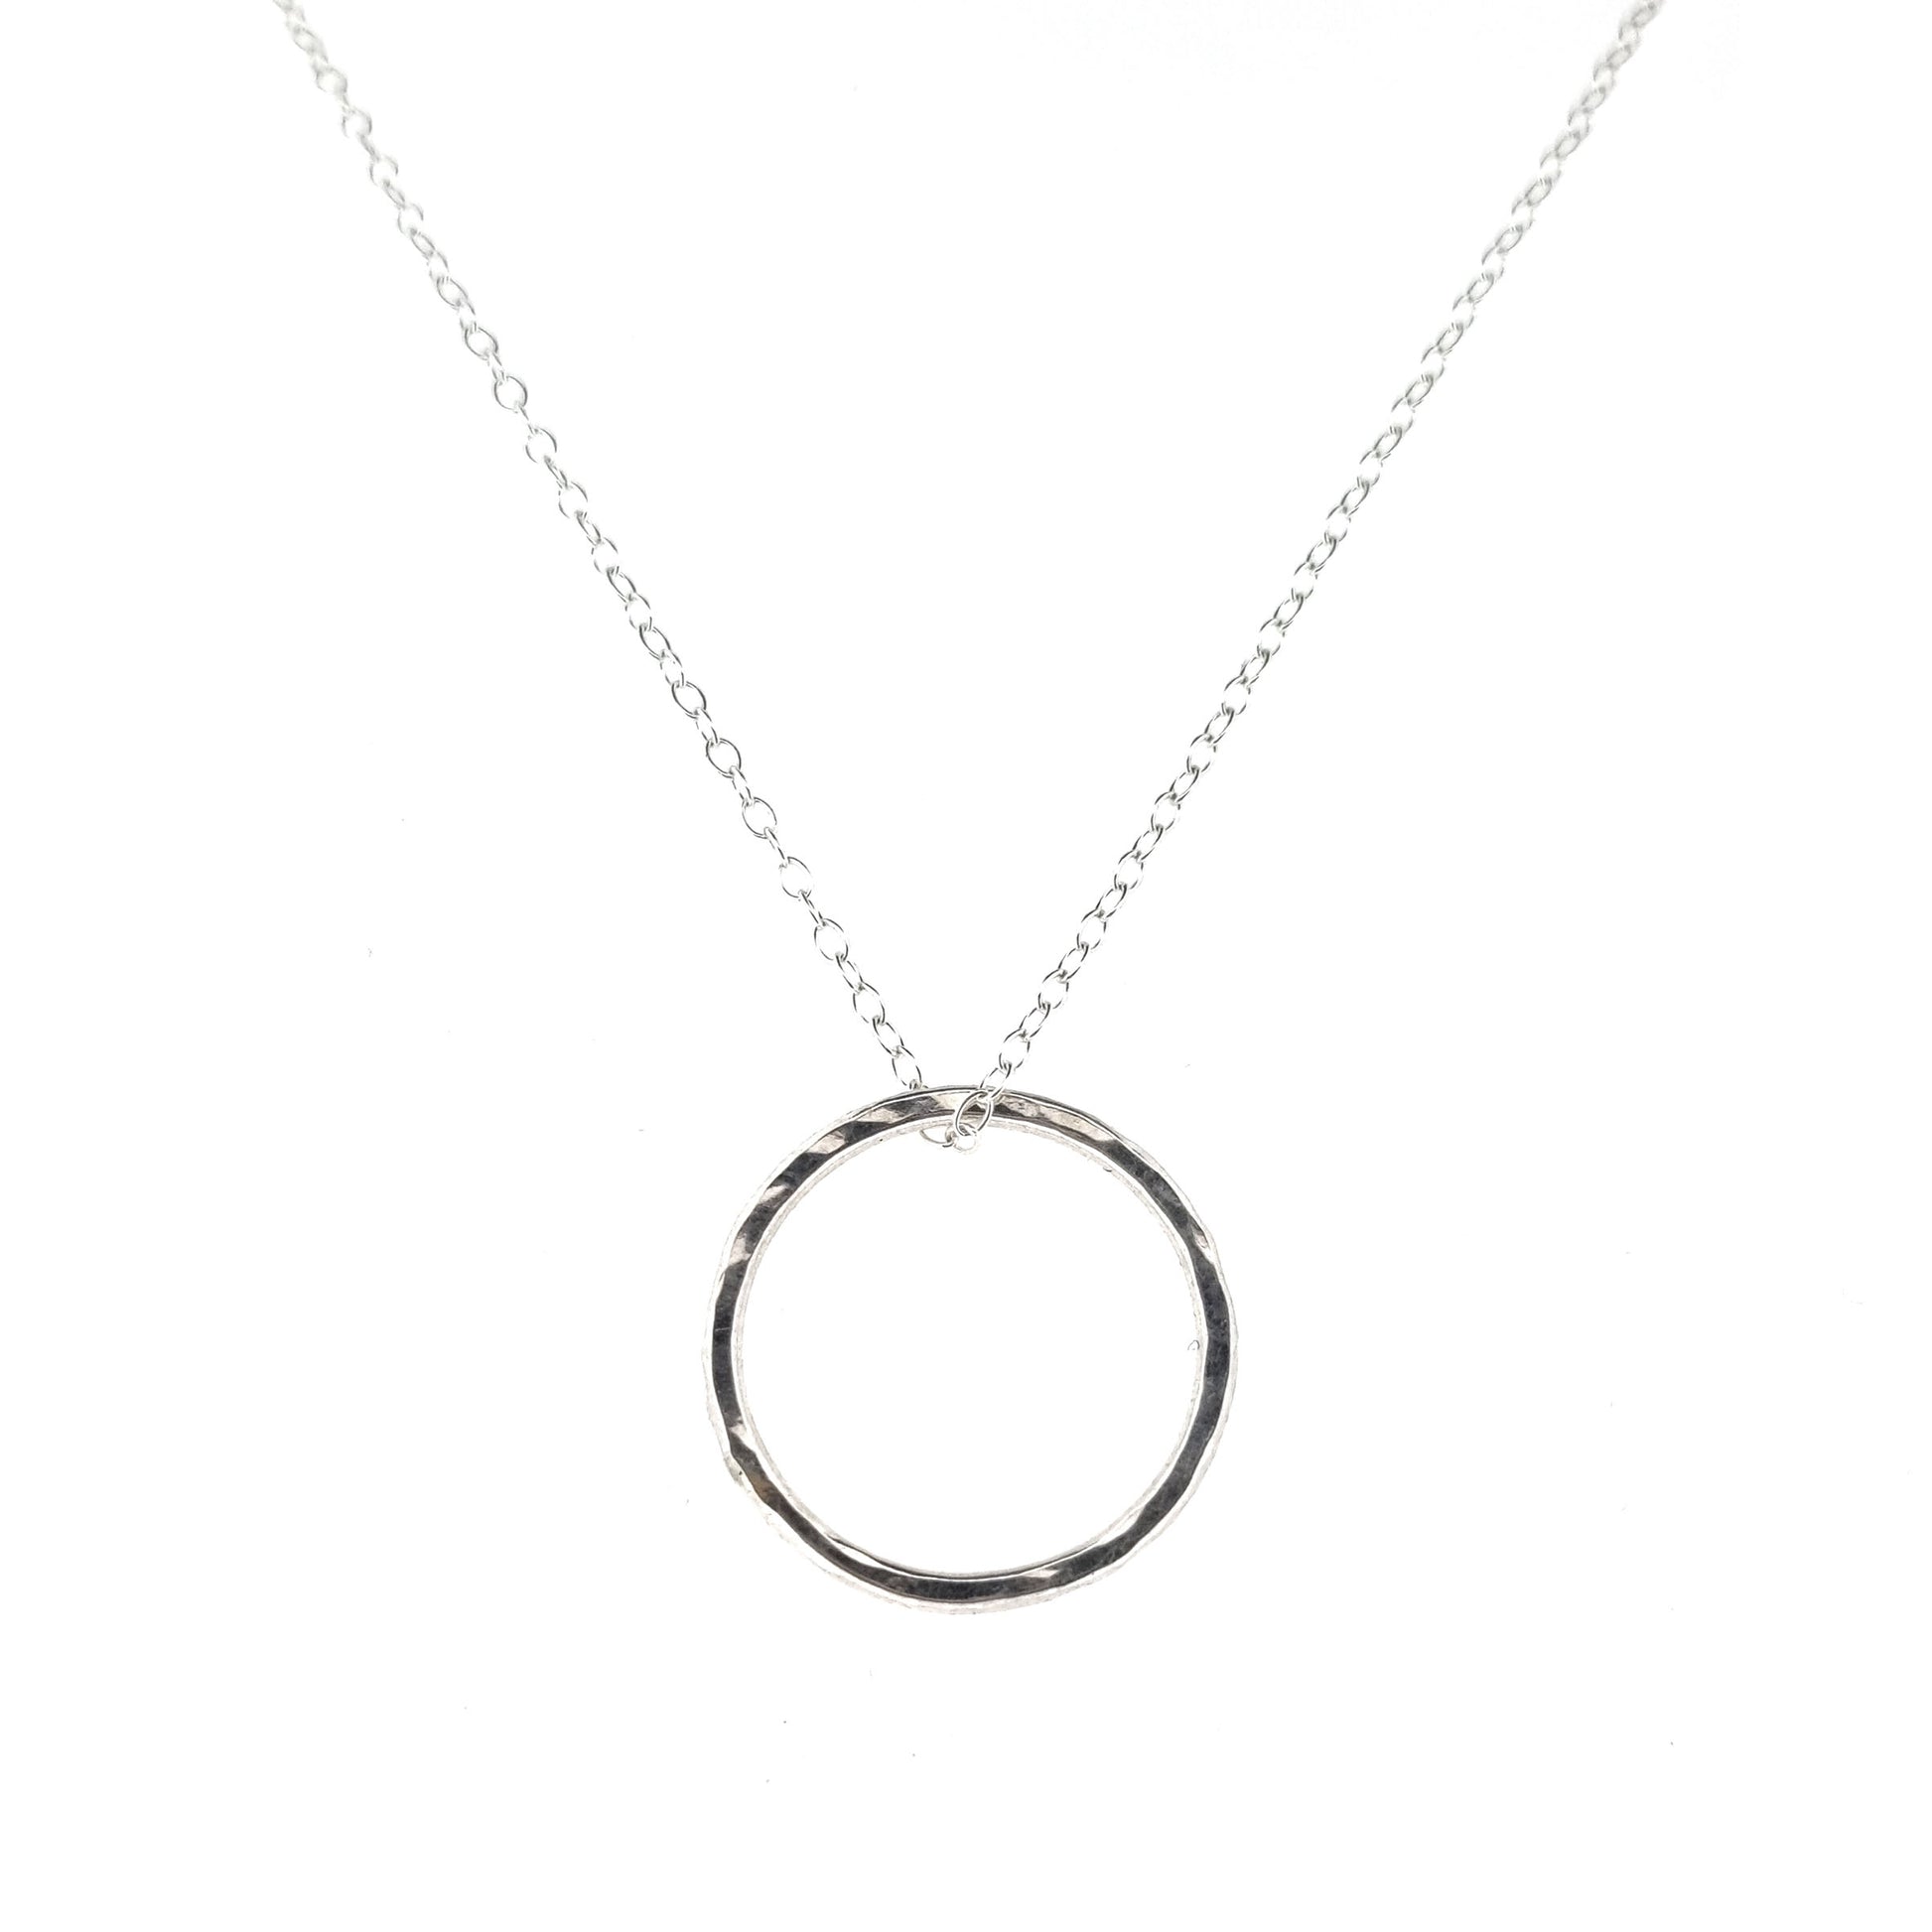 Silver hammered open circle pendant on silver chain - large